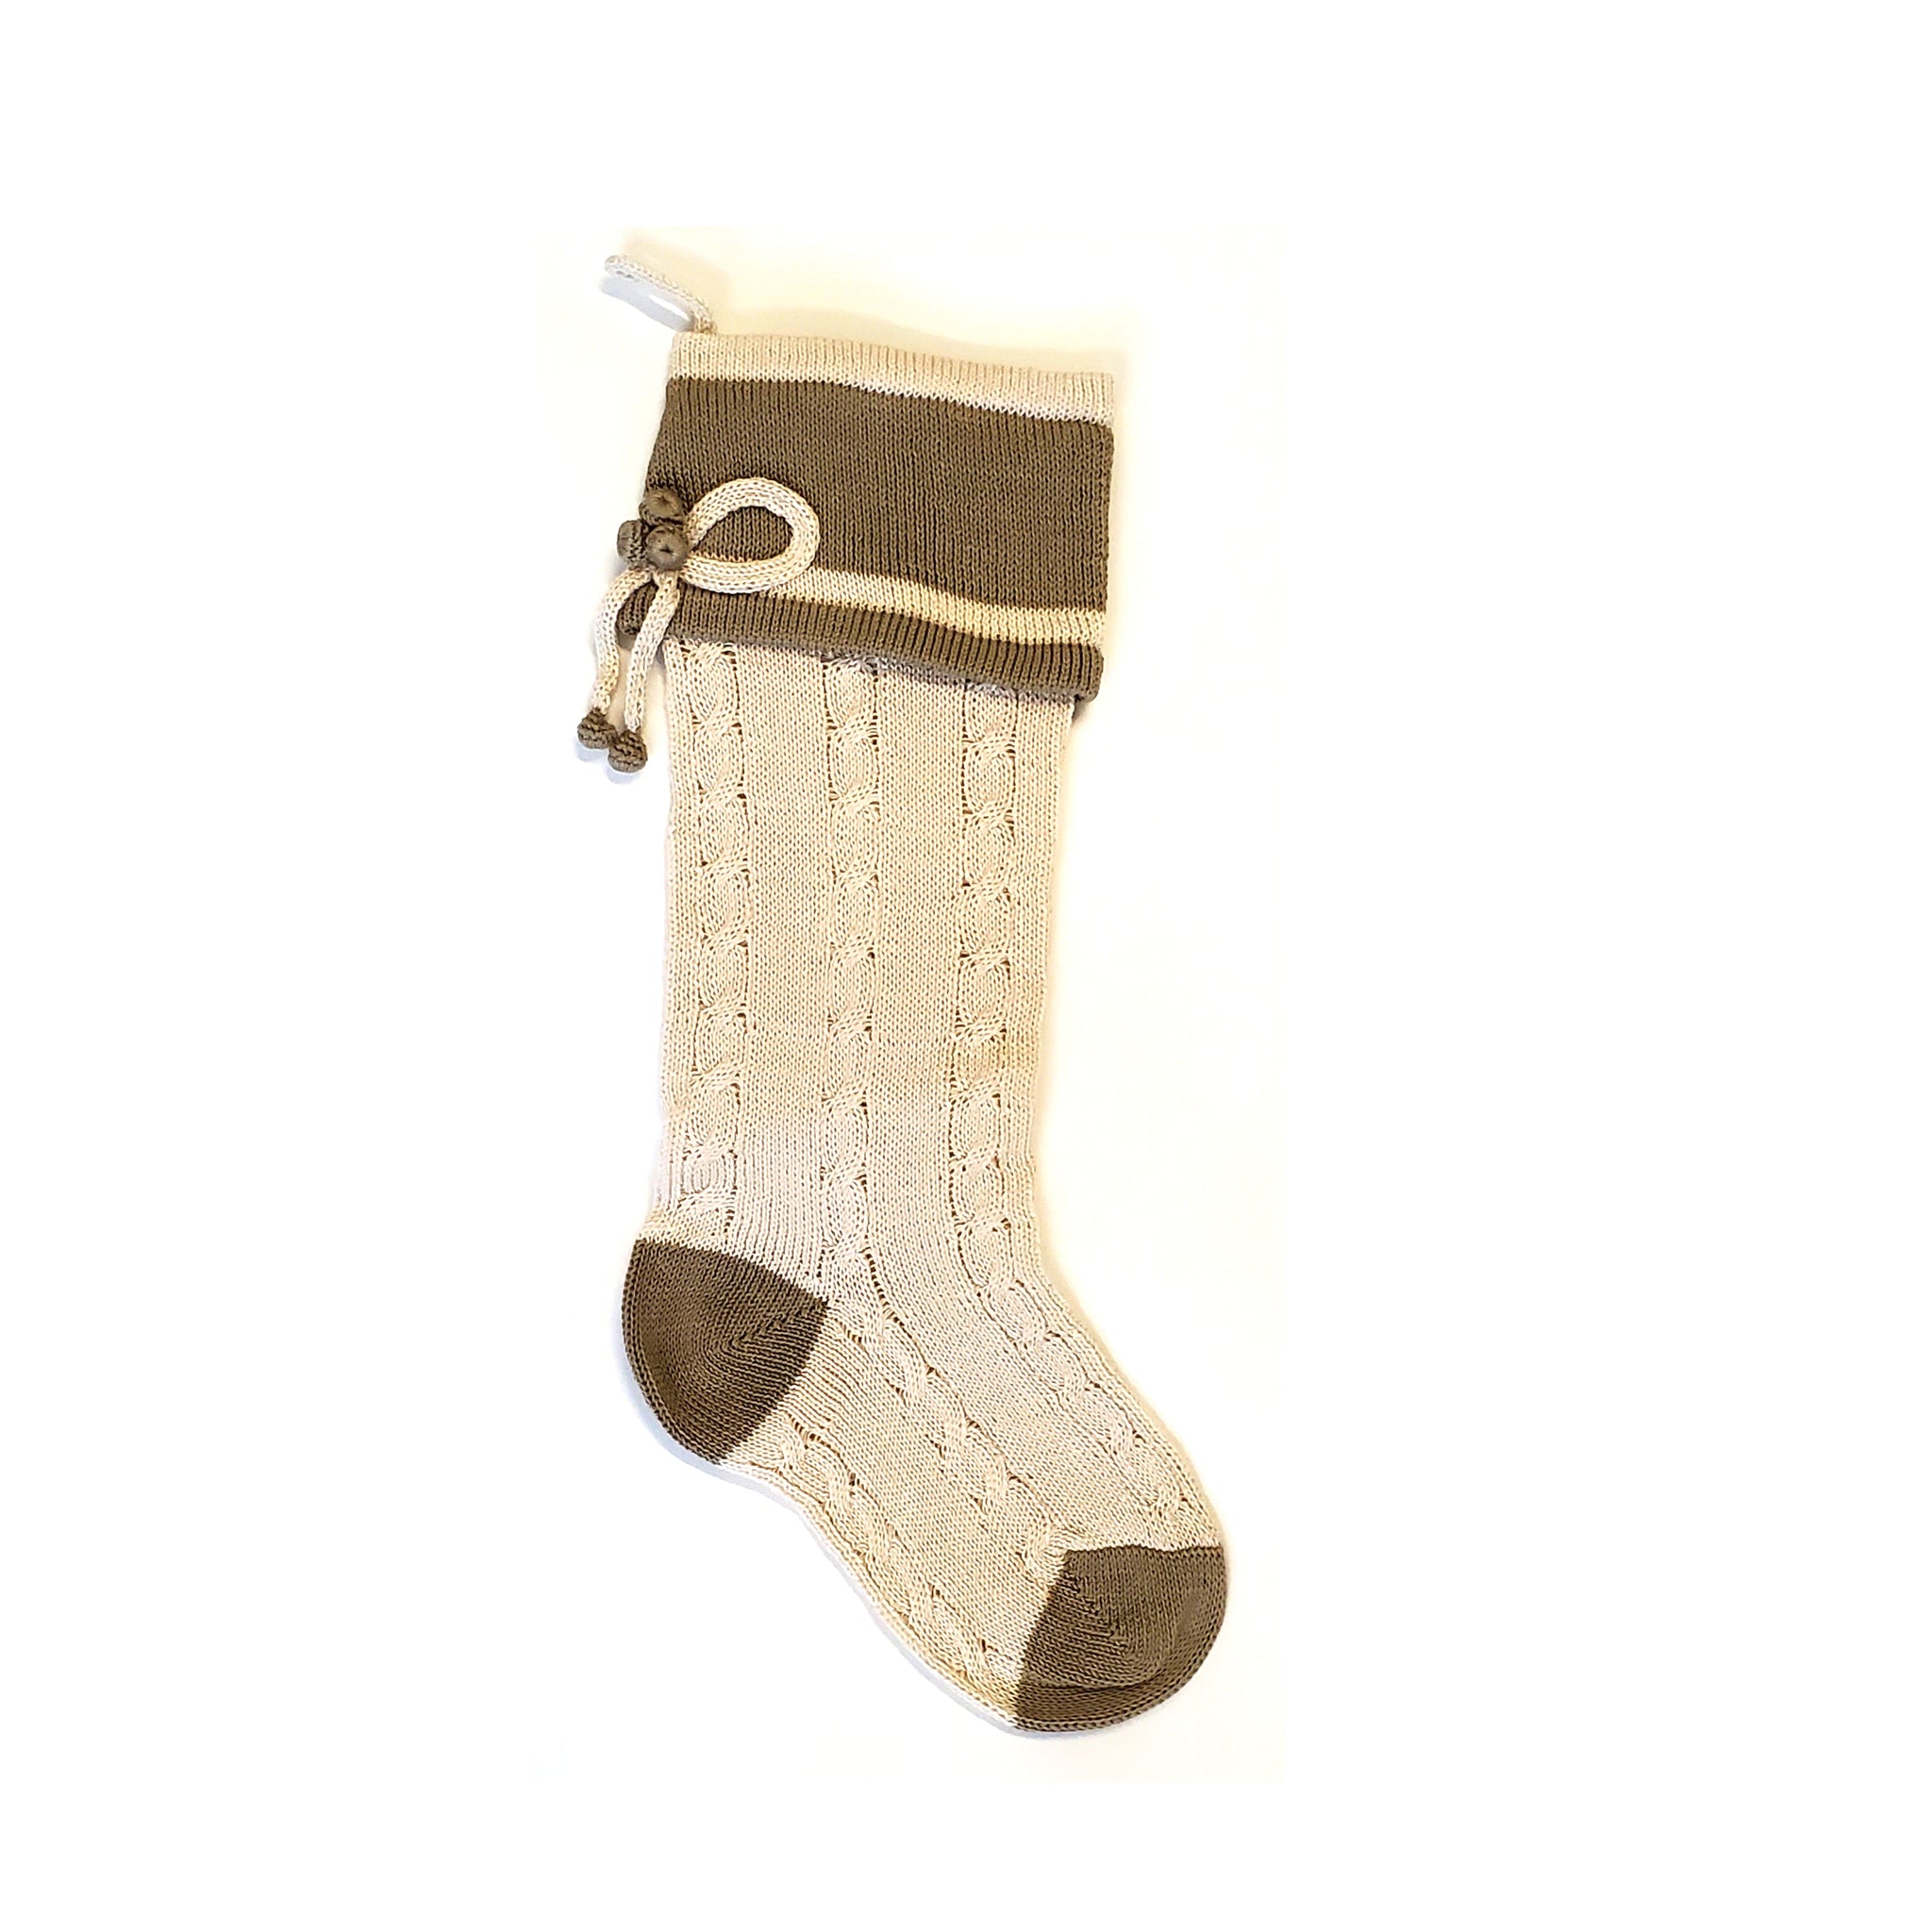 Ecru Cable Knit Stocking